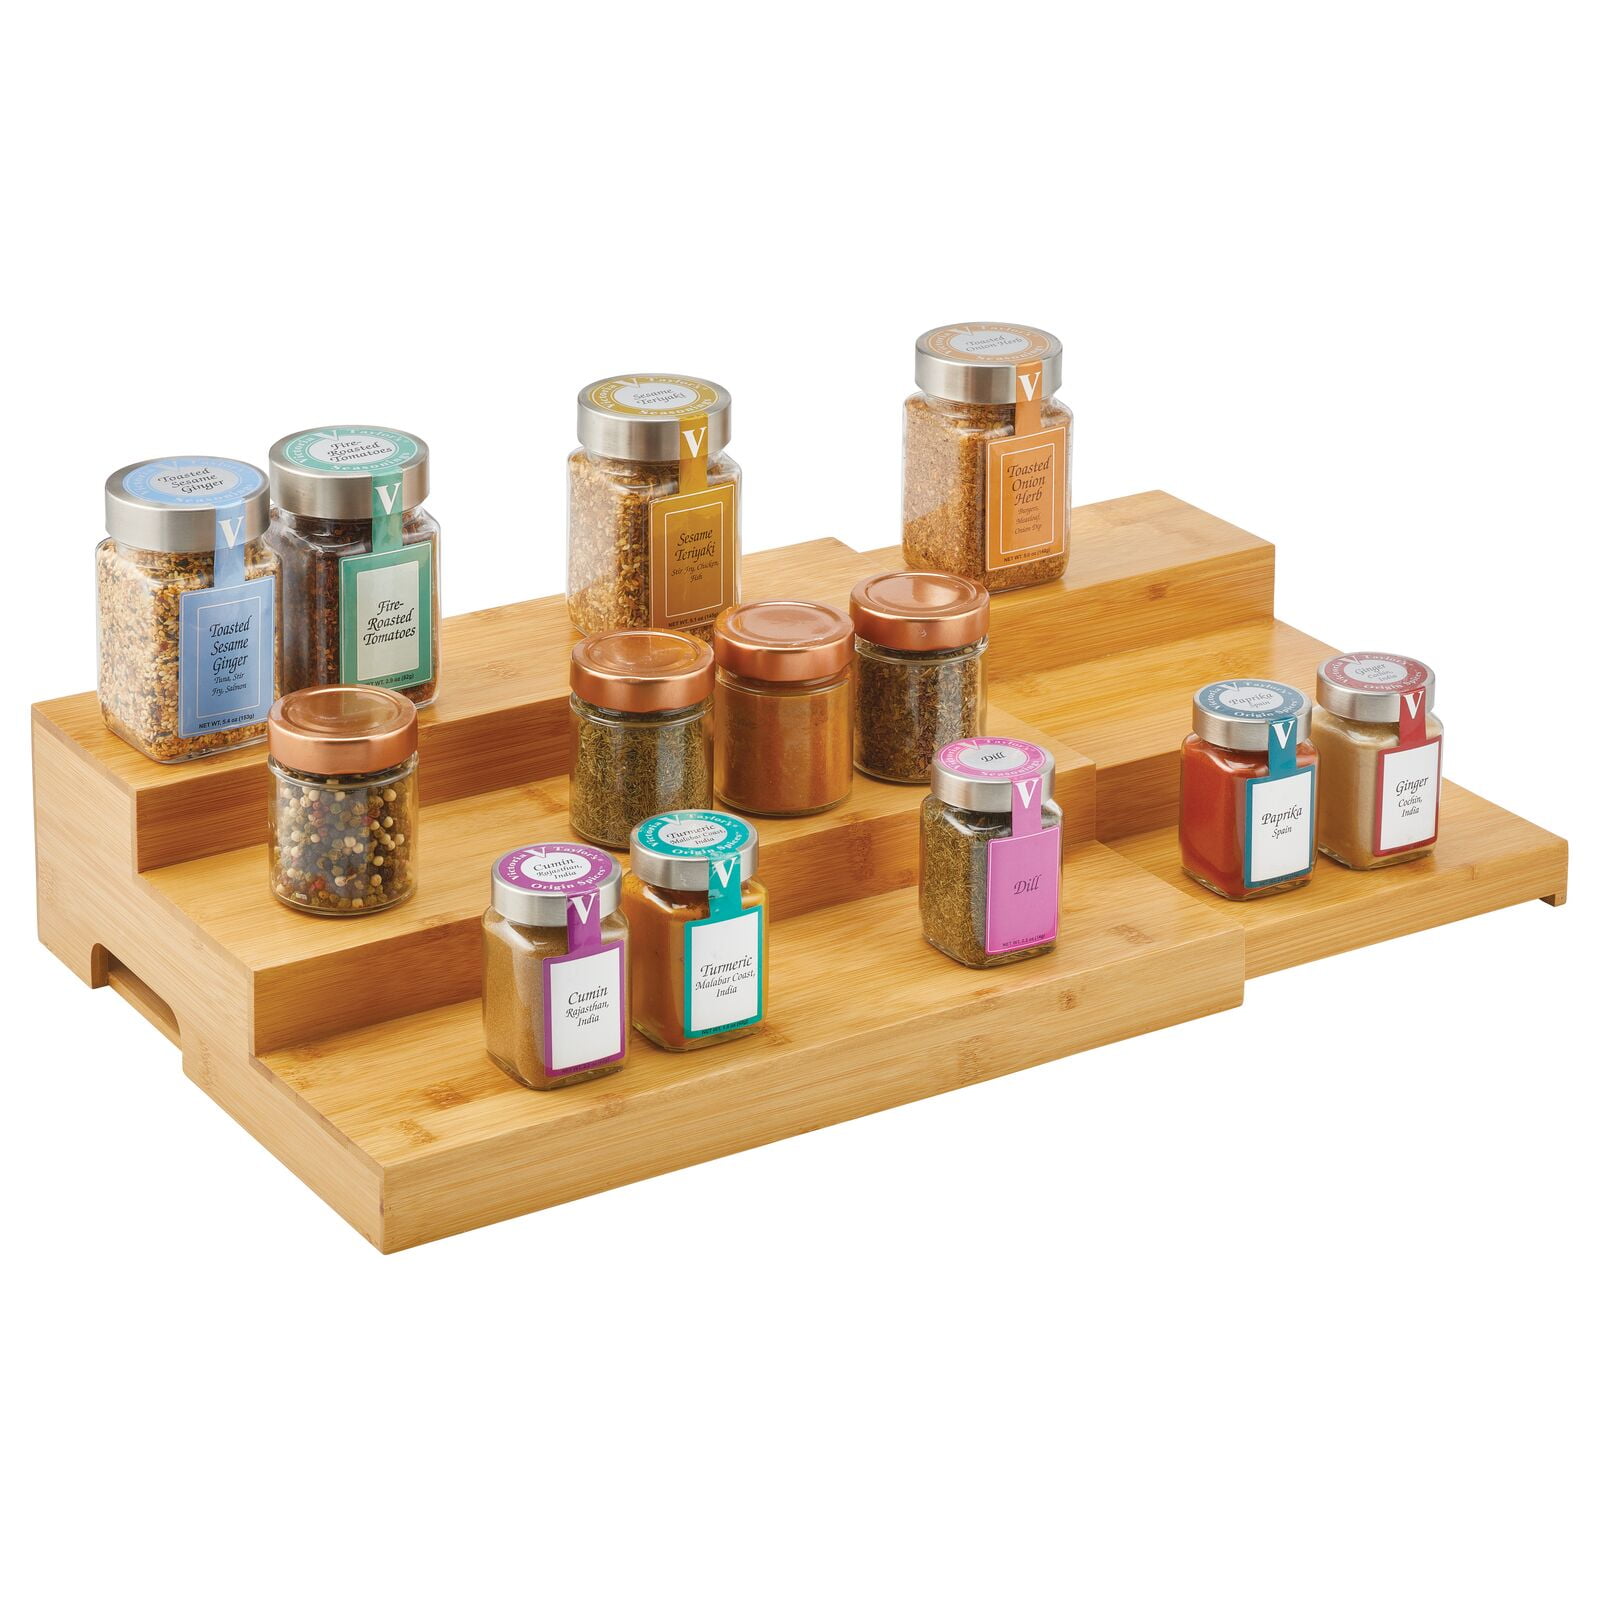 Restaurantware 12.5x9.75x4.25 inch Spice Shelf,1 Expandable Spice Step-3-Tier,For Kitchen Cabinets,Pantries,Countertops,Bathrooms,Natural Bamboo